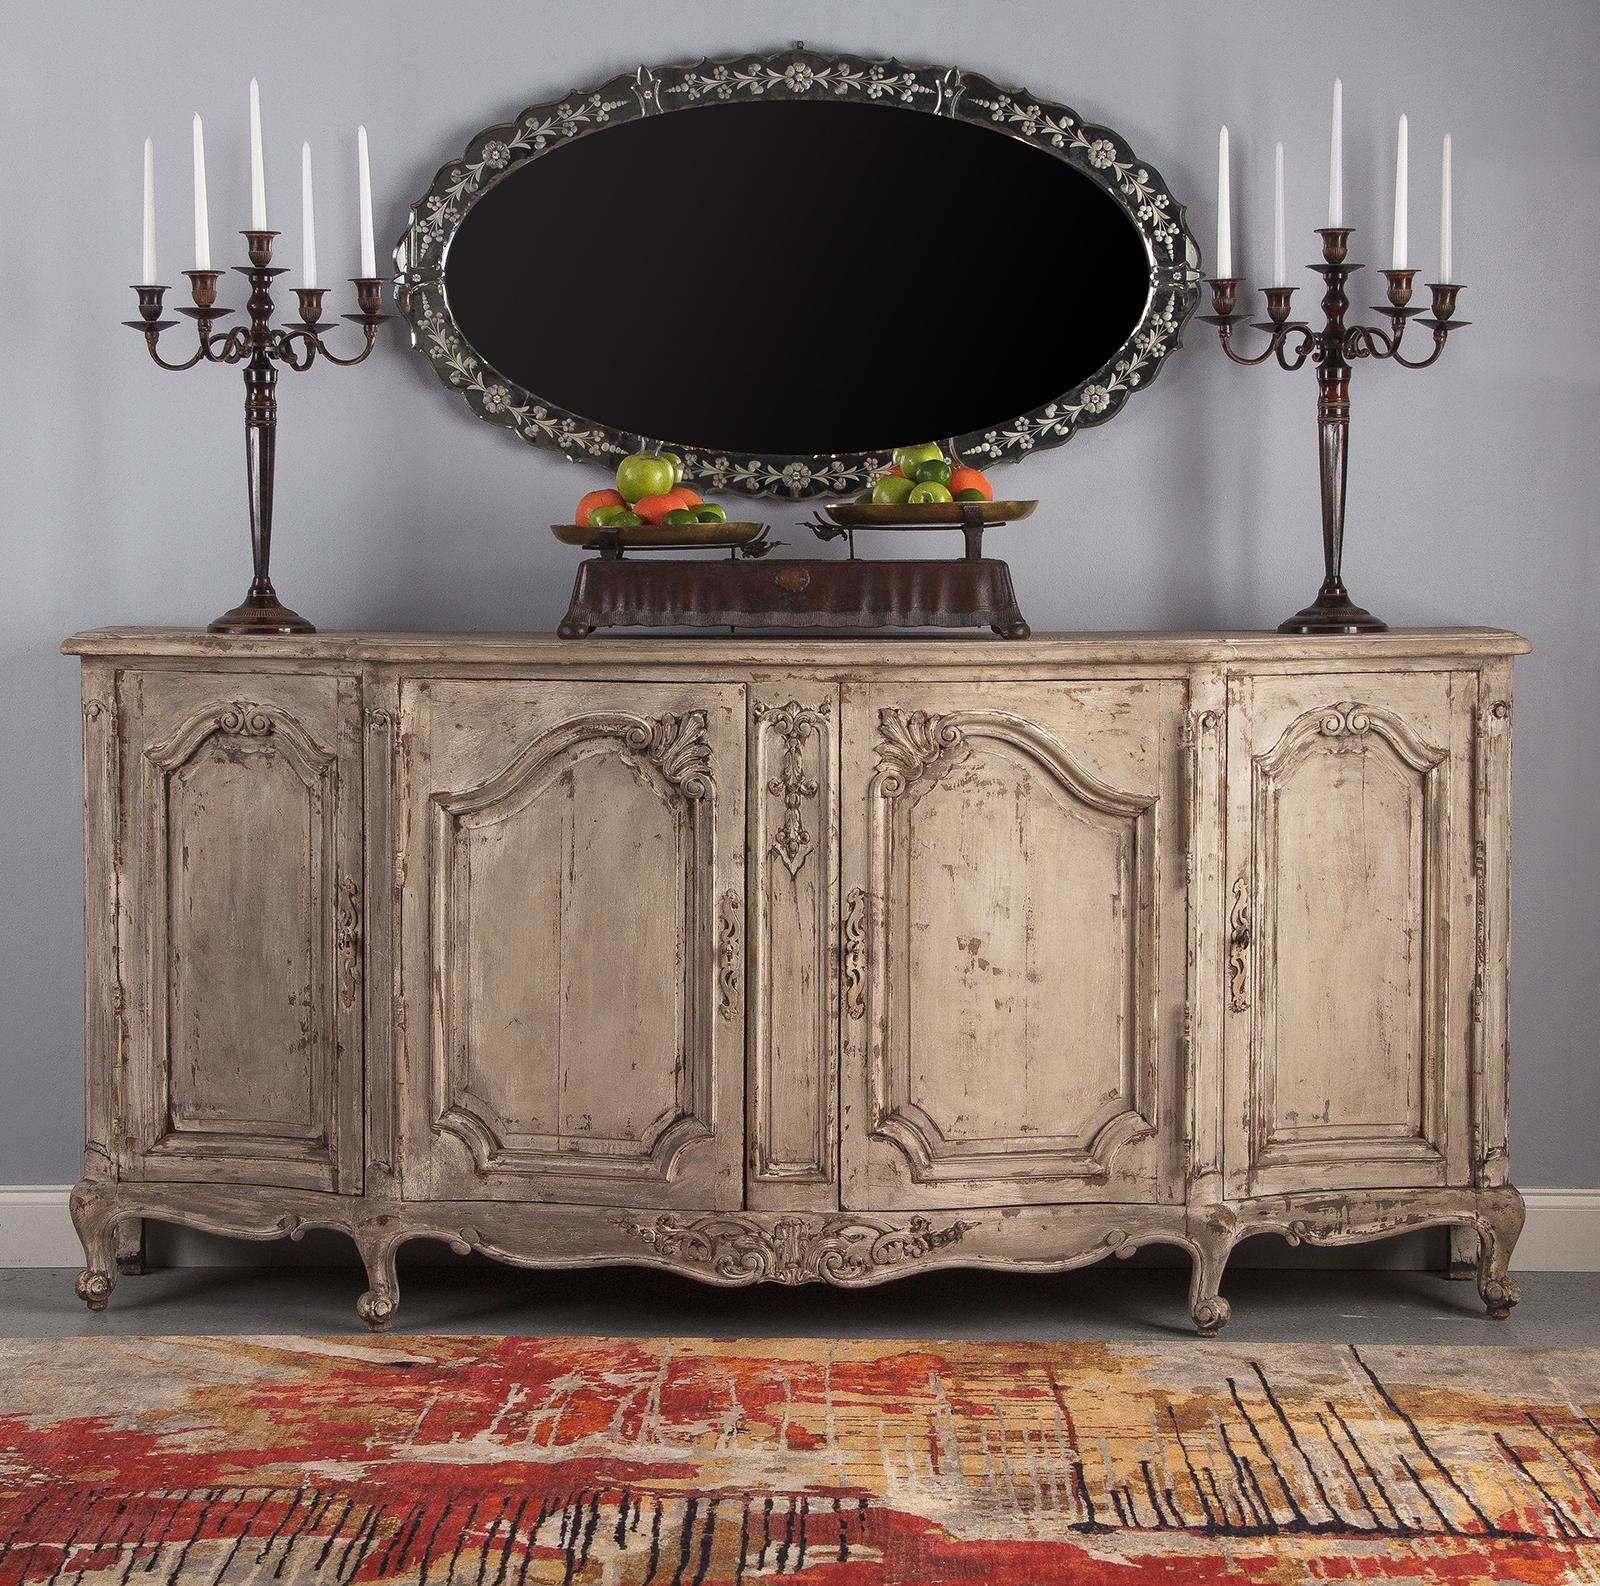 A marvelous, large antique Louis XV style painted enfilade buffet, French, circa 1900. Thick walnut construction with oak planks used at the paneled back and for shelving. Heavily distressed painting throughout in creamy gray tones. The piece is